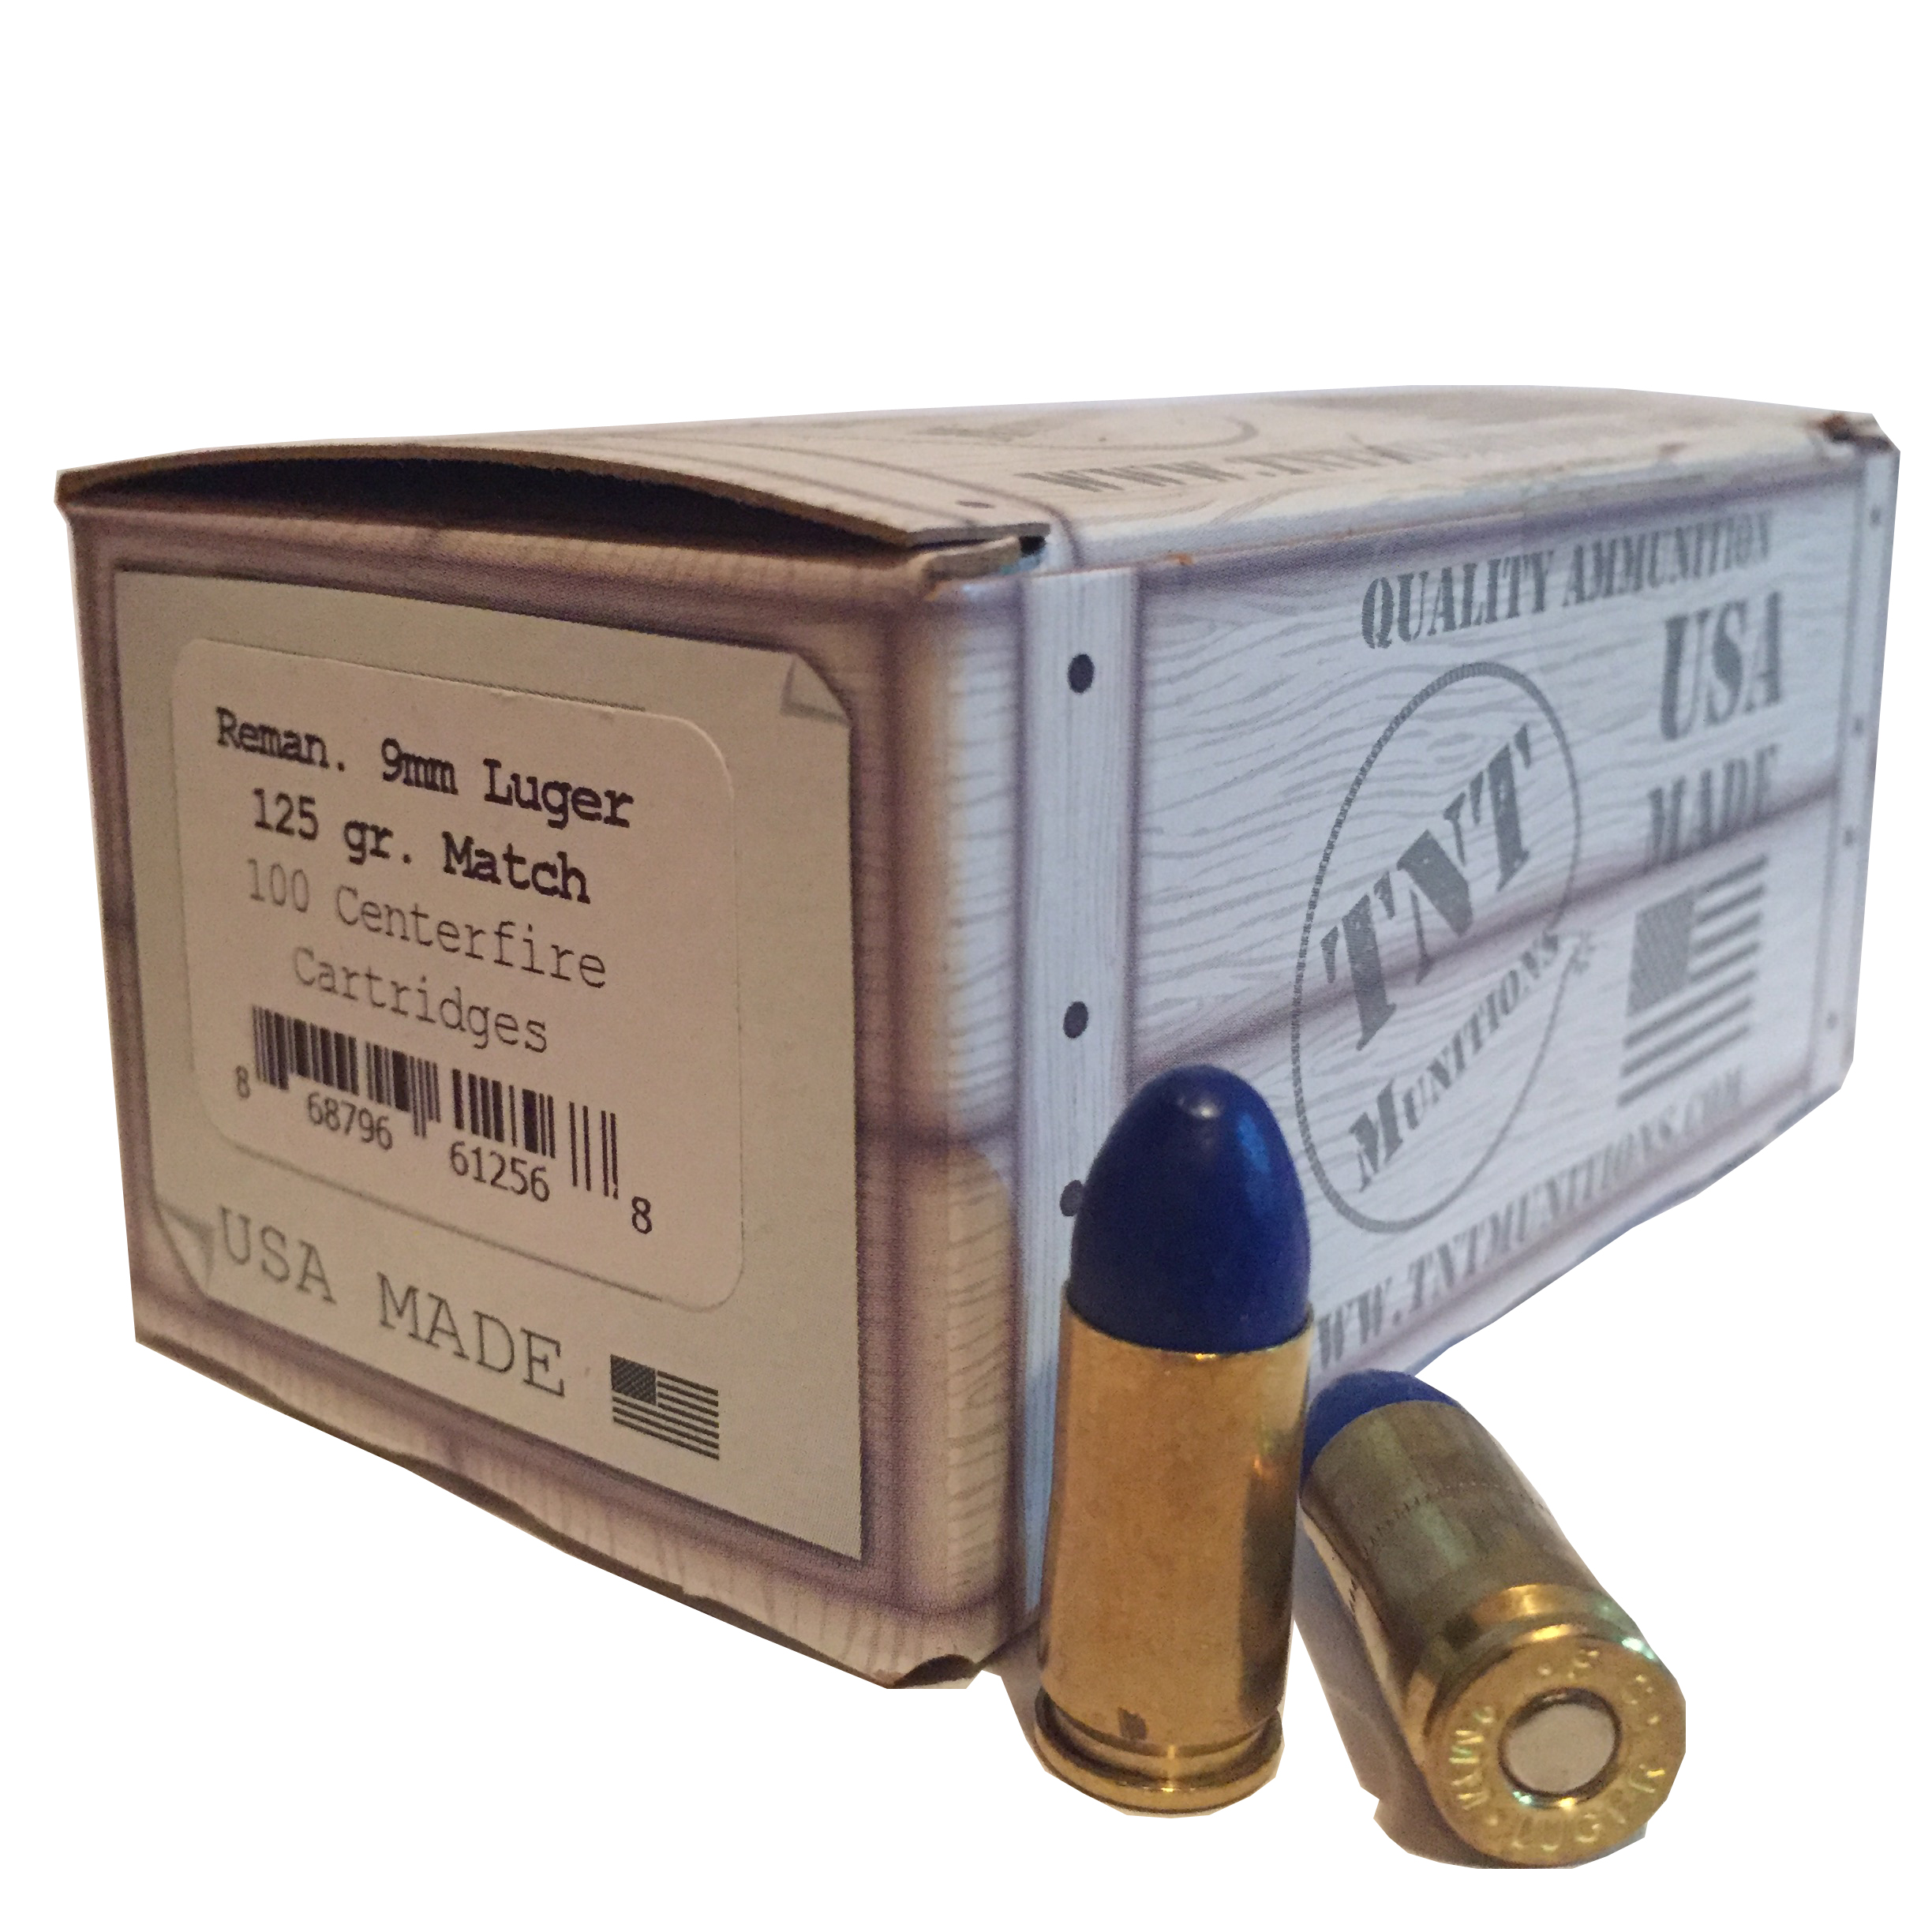 9mm Luger 125 gr. RN Match Minor. MEMORIAL DAY SALE! THROUGH MAY 29TH ONLY - SHIPS NBD